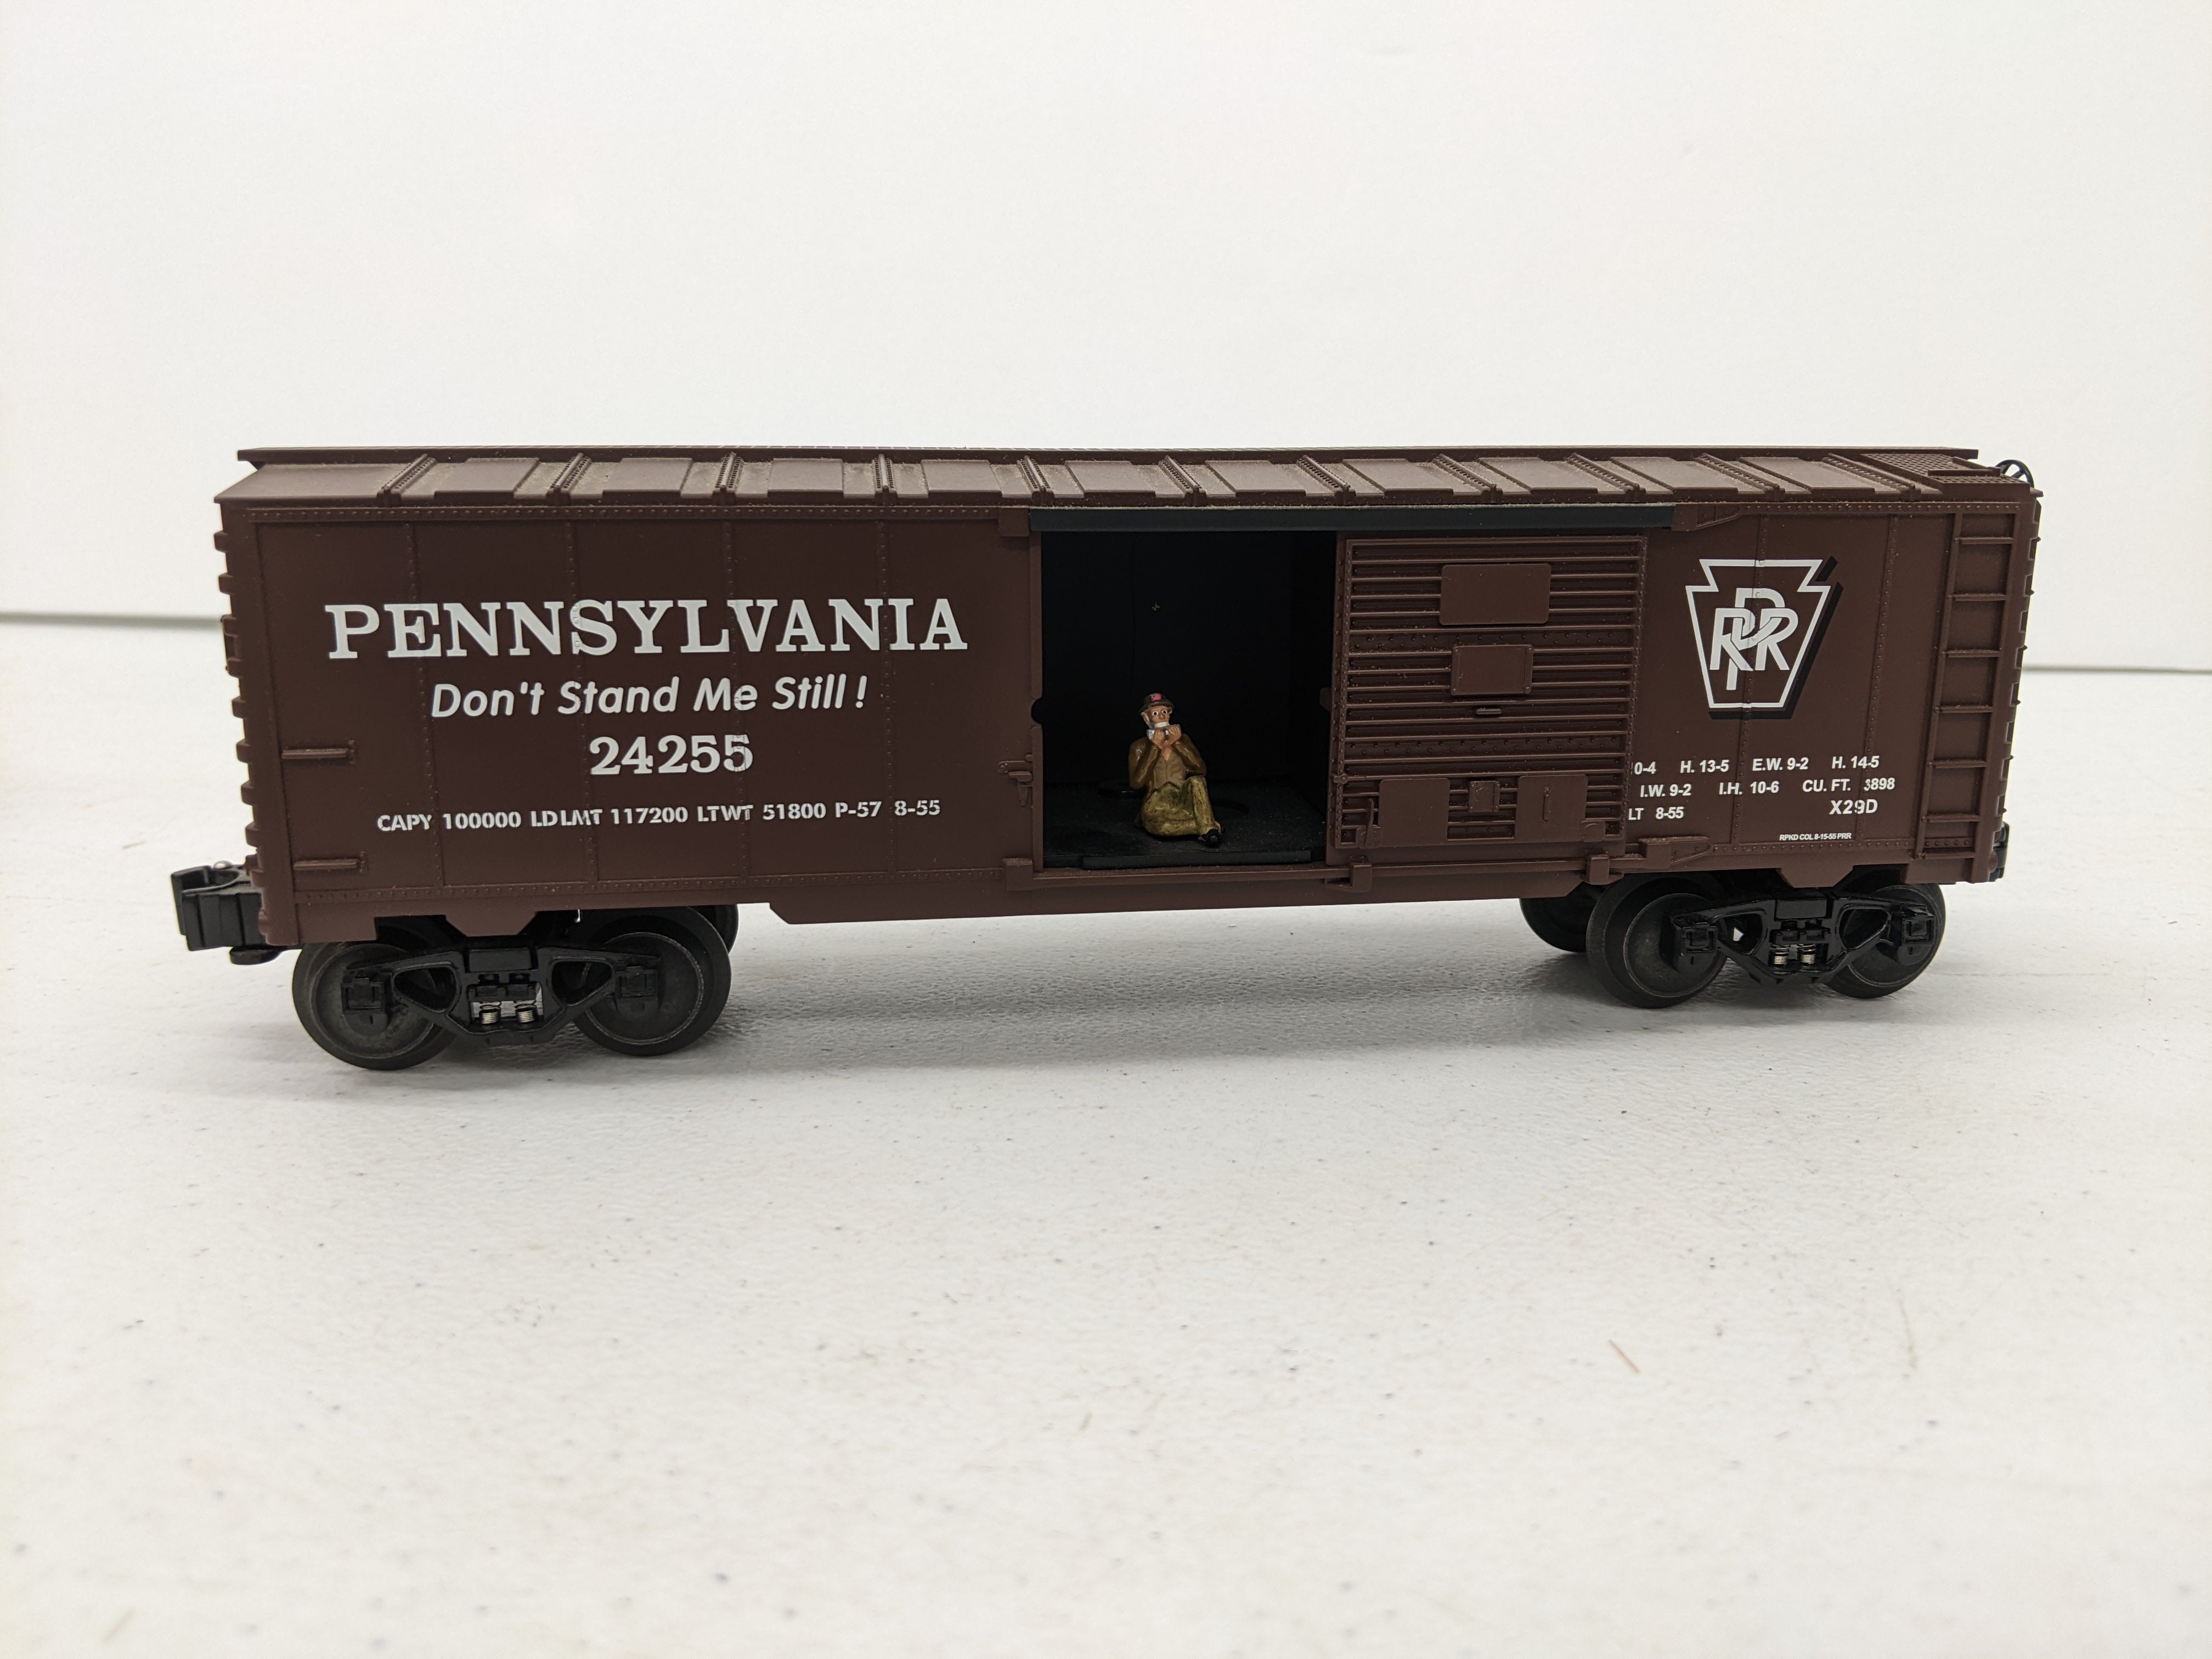 USED Lionel 6-26815 O Scale, Box Car with Harmonica Sounds, Pennsylvania #24255, "Don't Stand Me Still"